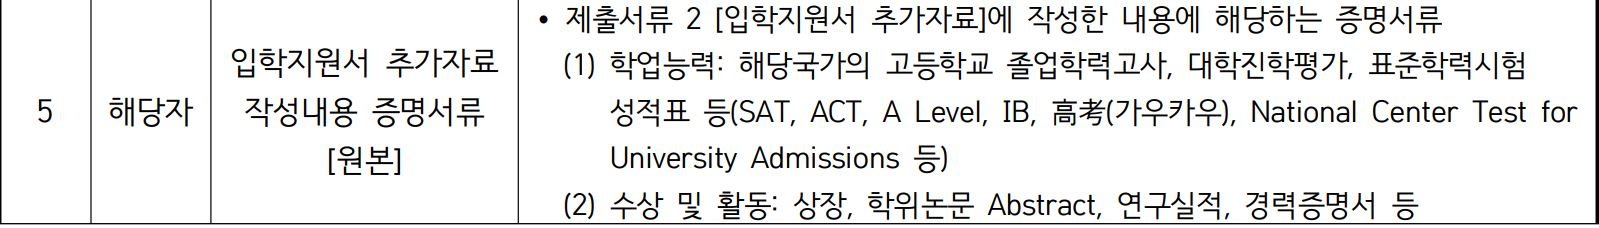 Ewha Womans University Foreign Student Admission Required Documents_English Version 이화여대 외국인전형 제출서류_영어본_04_제출서류.JPG